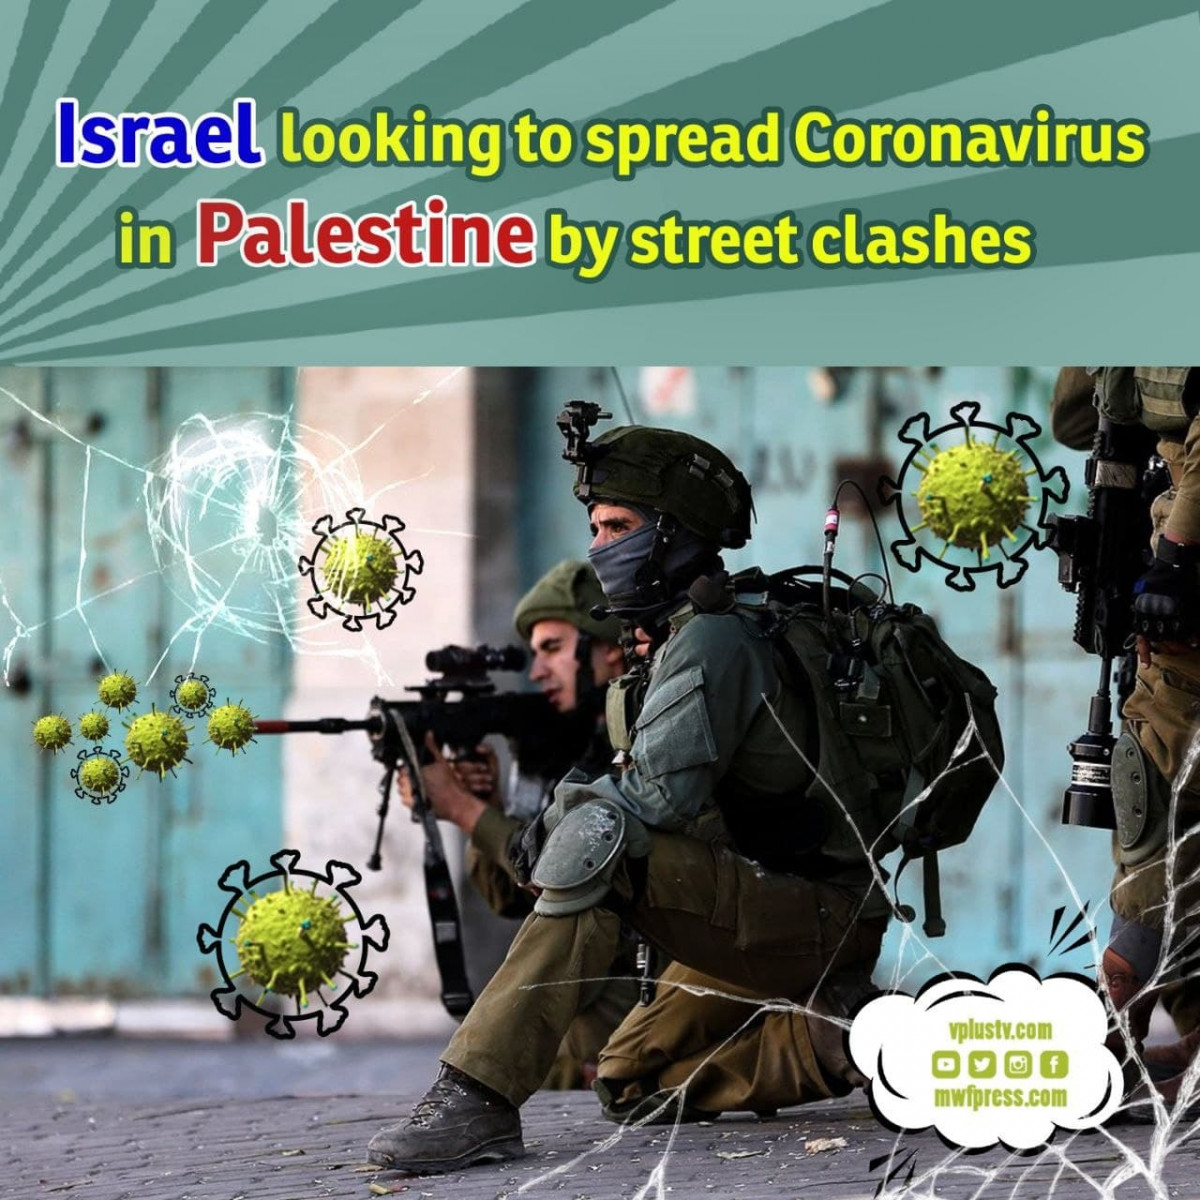 Israel looking to spread Coronavirus in Palestine by street clashes